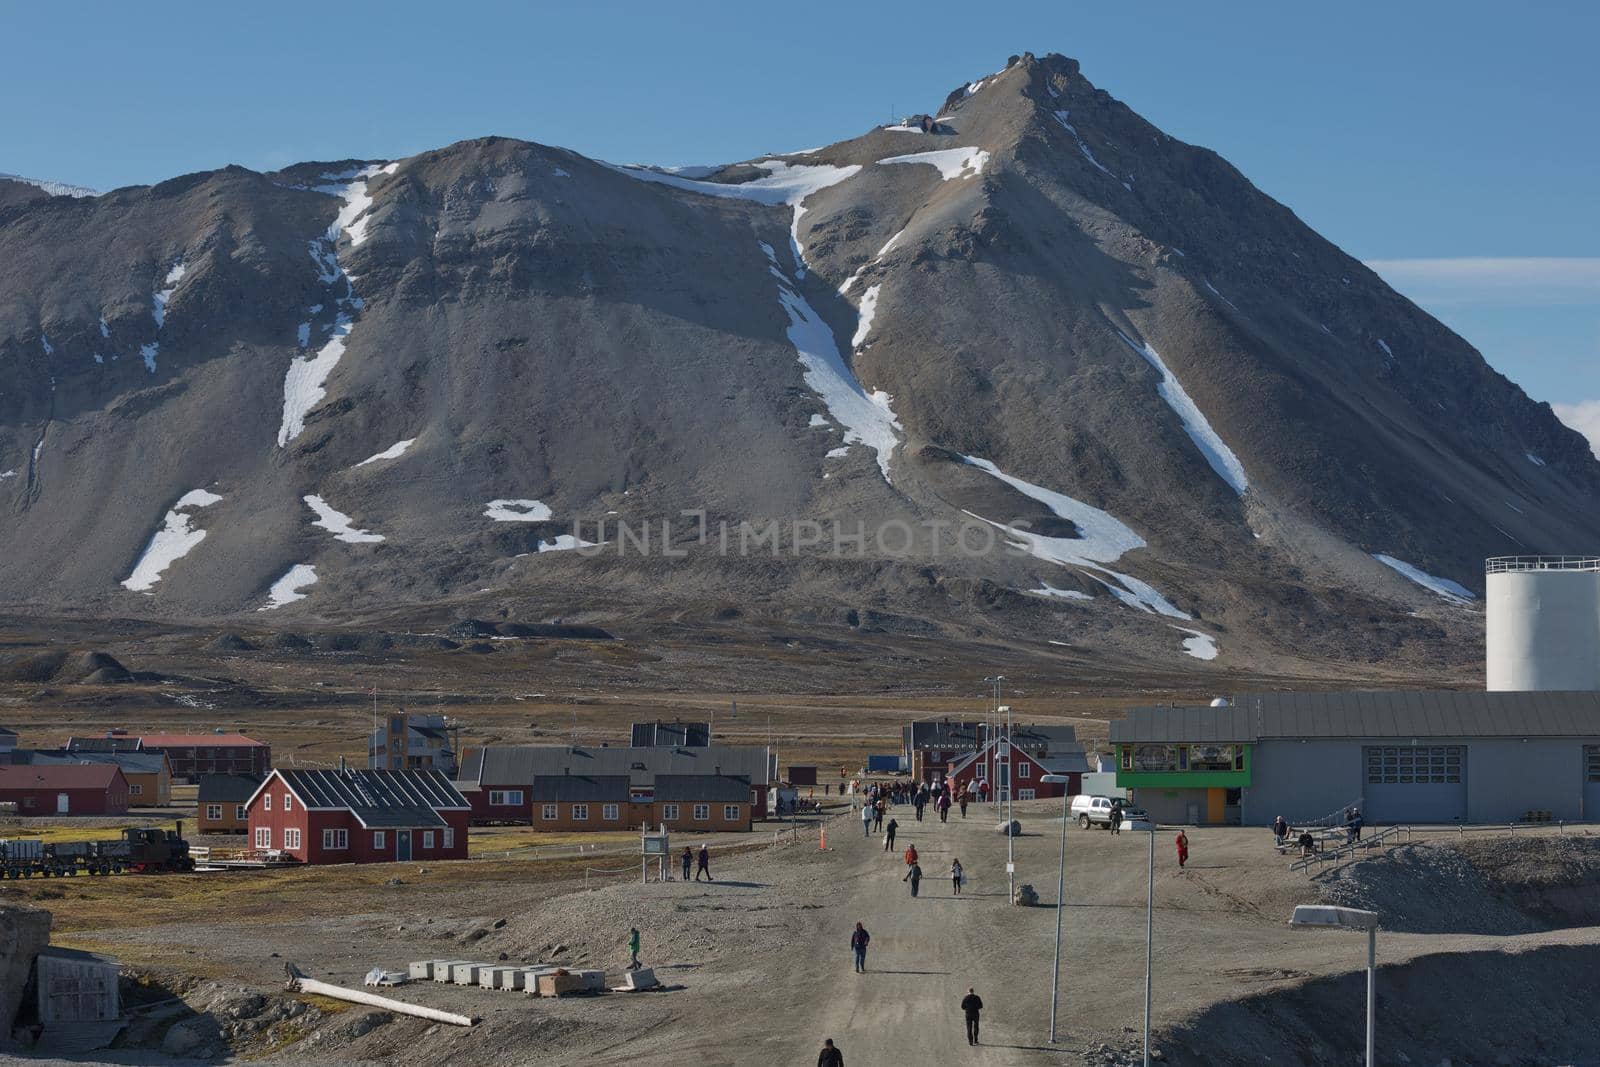 Ny-Alesund, Svalbard, Norway - July 24 2017: The small town of Ny Alesund in Svalbard, a Norwegian archipelago between Norway and the North Pole. This is the most northerly civilian settlement in the world.